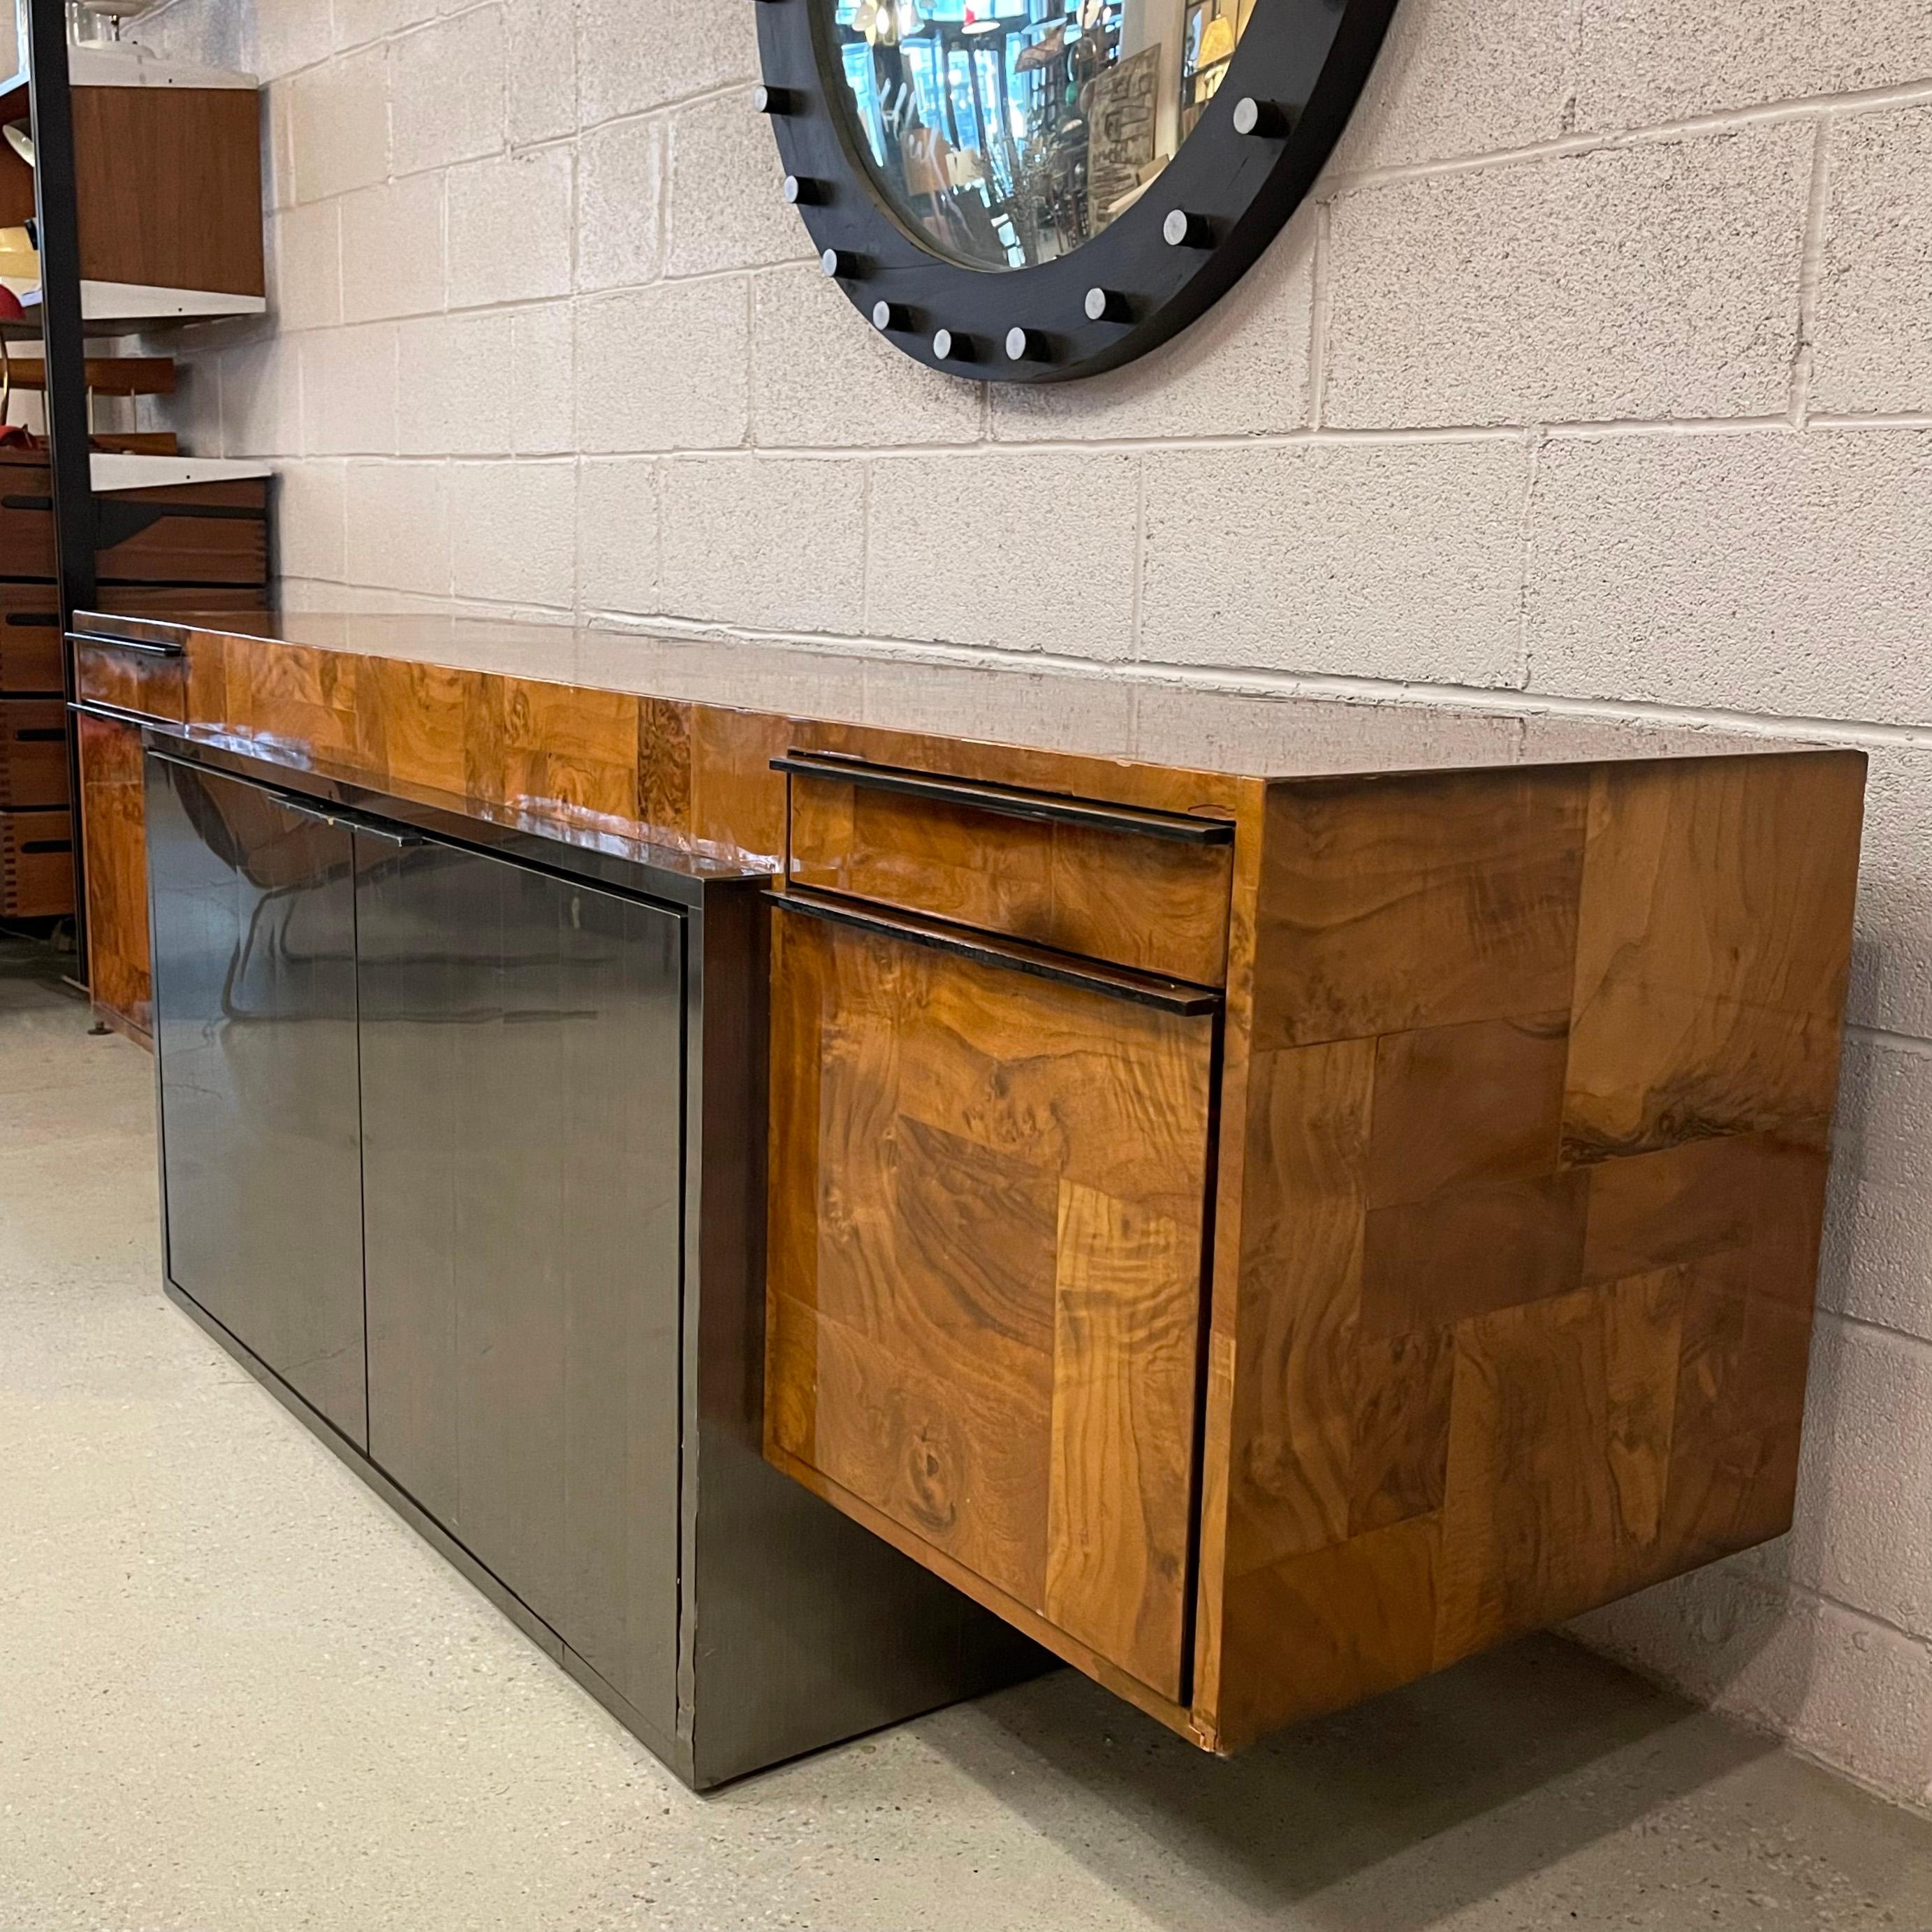 Steel Modernist Patchwork Burl Credenza By Paul Evans For Directional For Sale